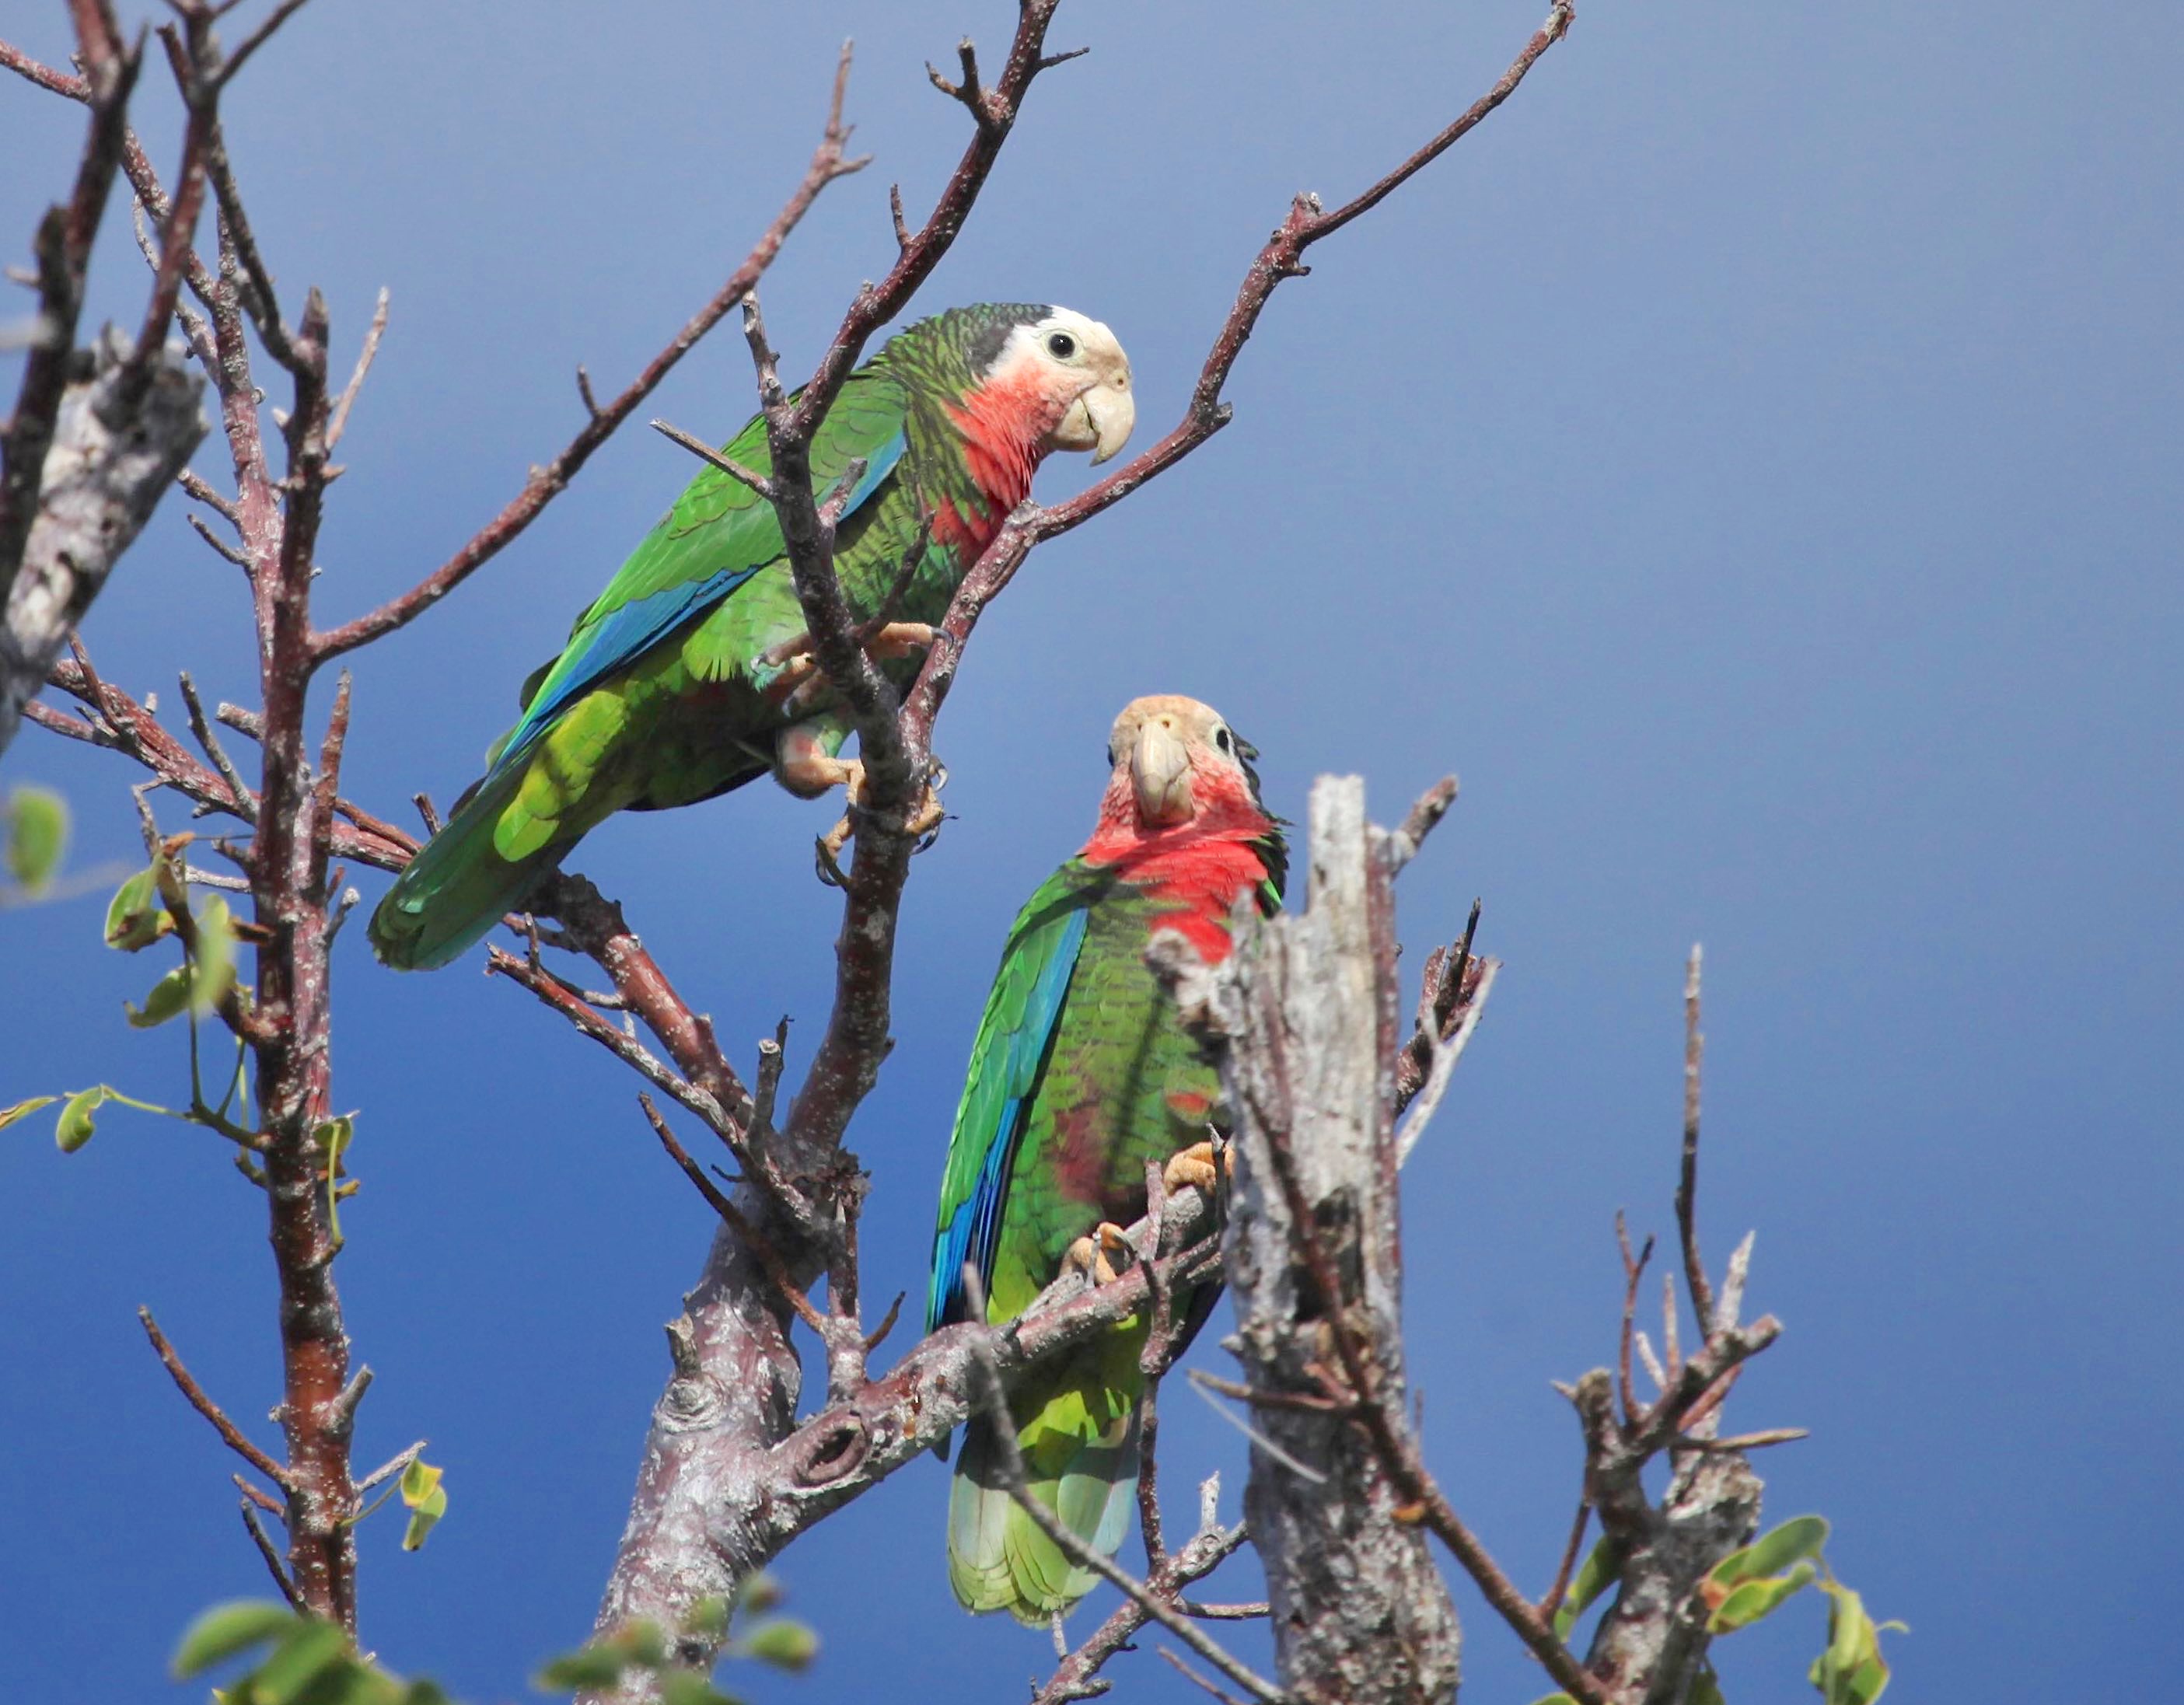 Abaco Parrots, Bahamas (Peter Mantle)